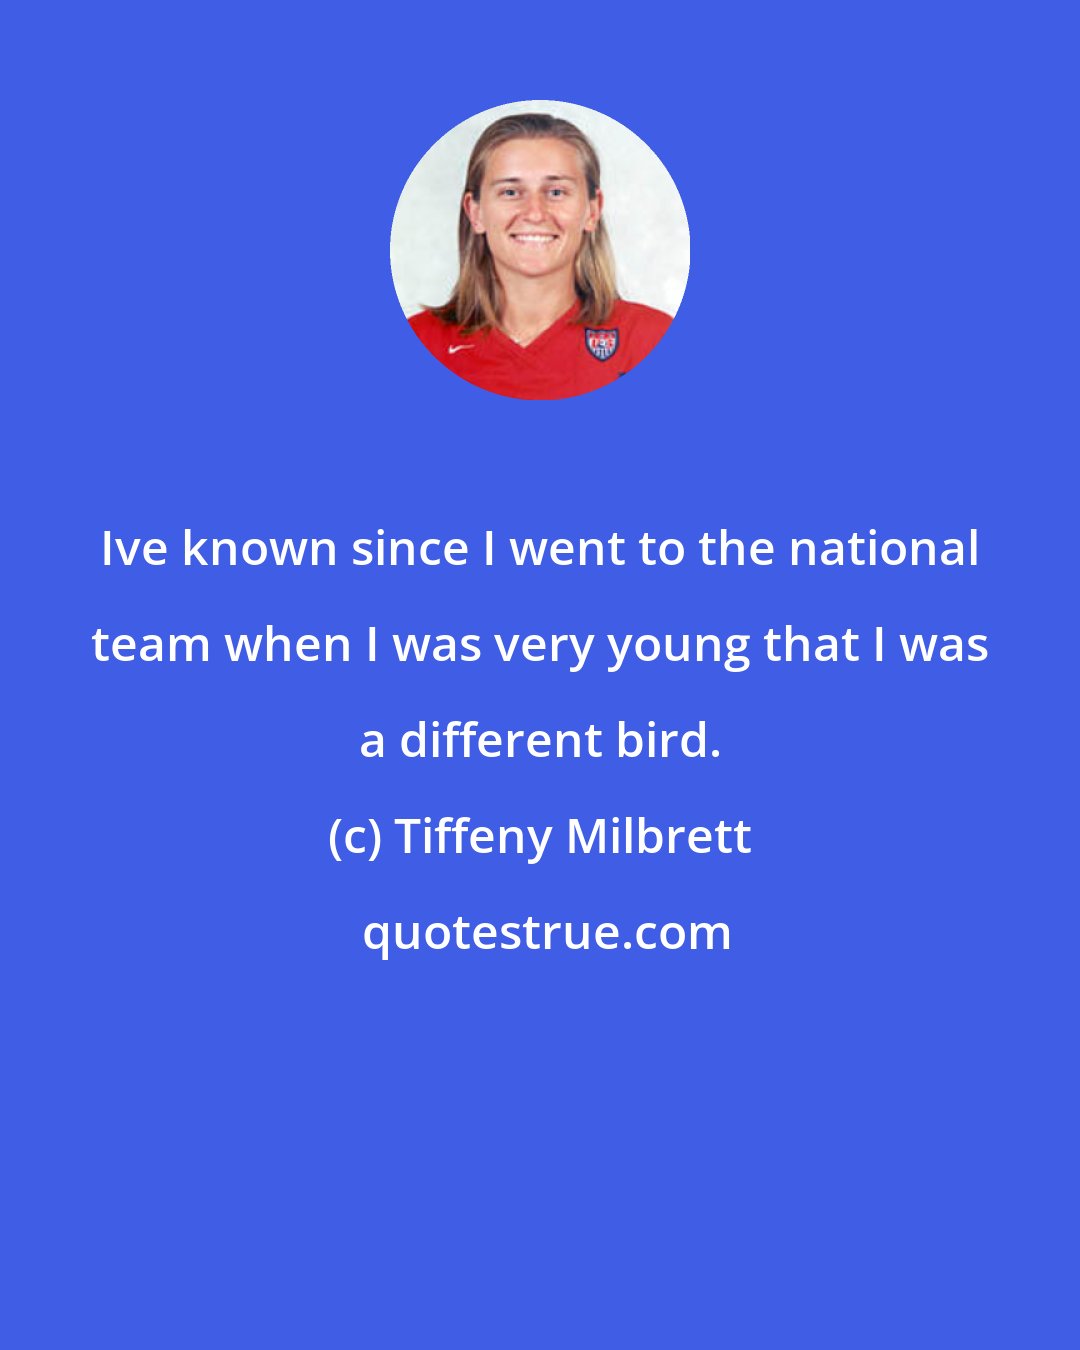 Tiffeny Milbrett: Ive known since I went to the national team when I was very young that I was a different bird.